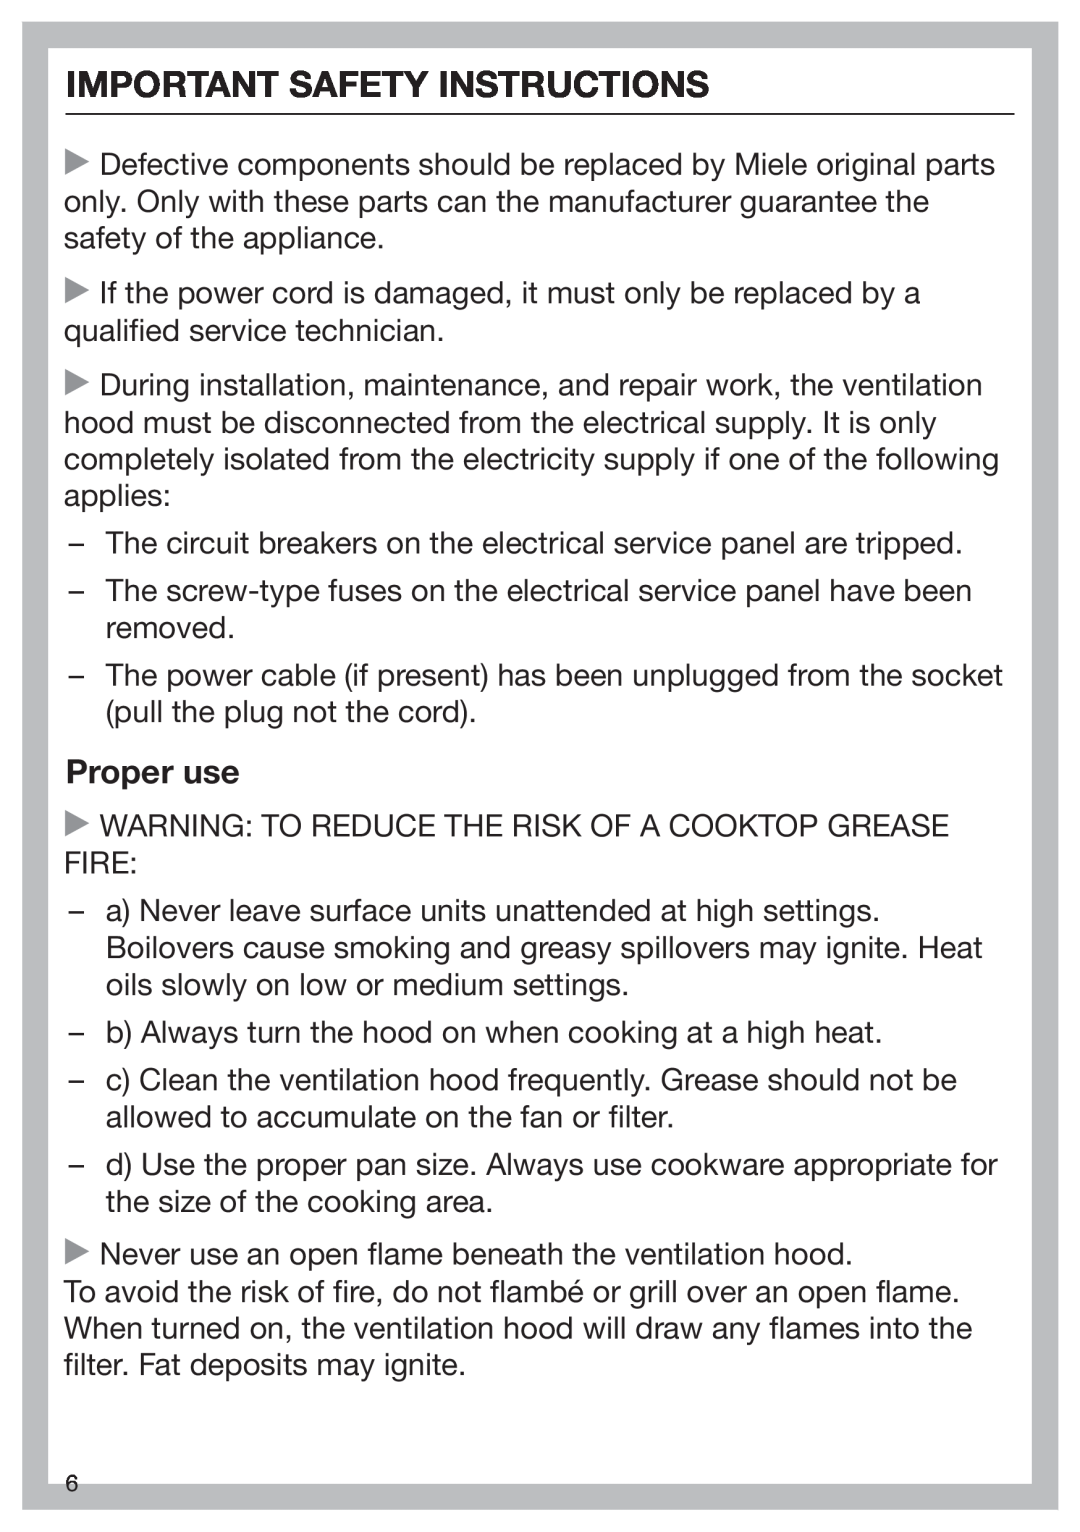 Miele 09 968 240 installation instructions Proper use, Important Safety Instructions 